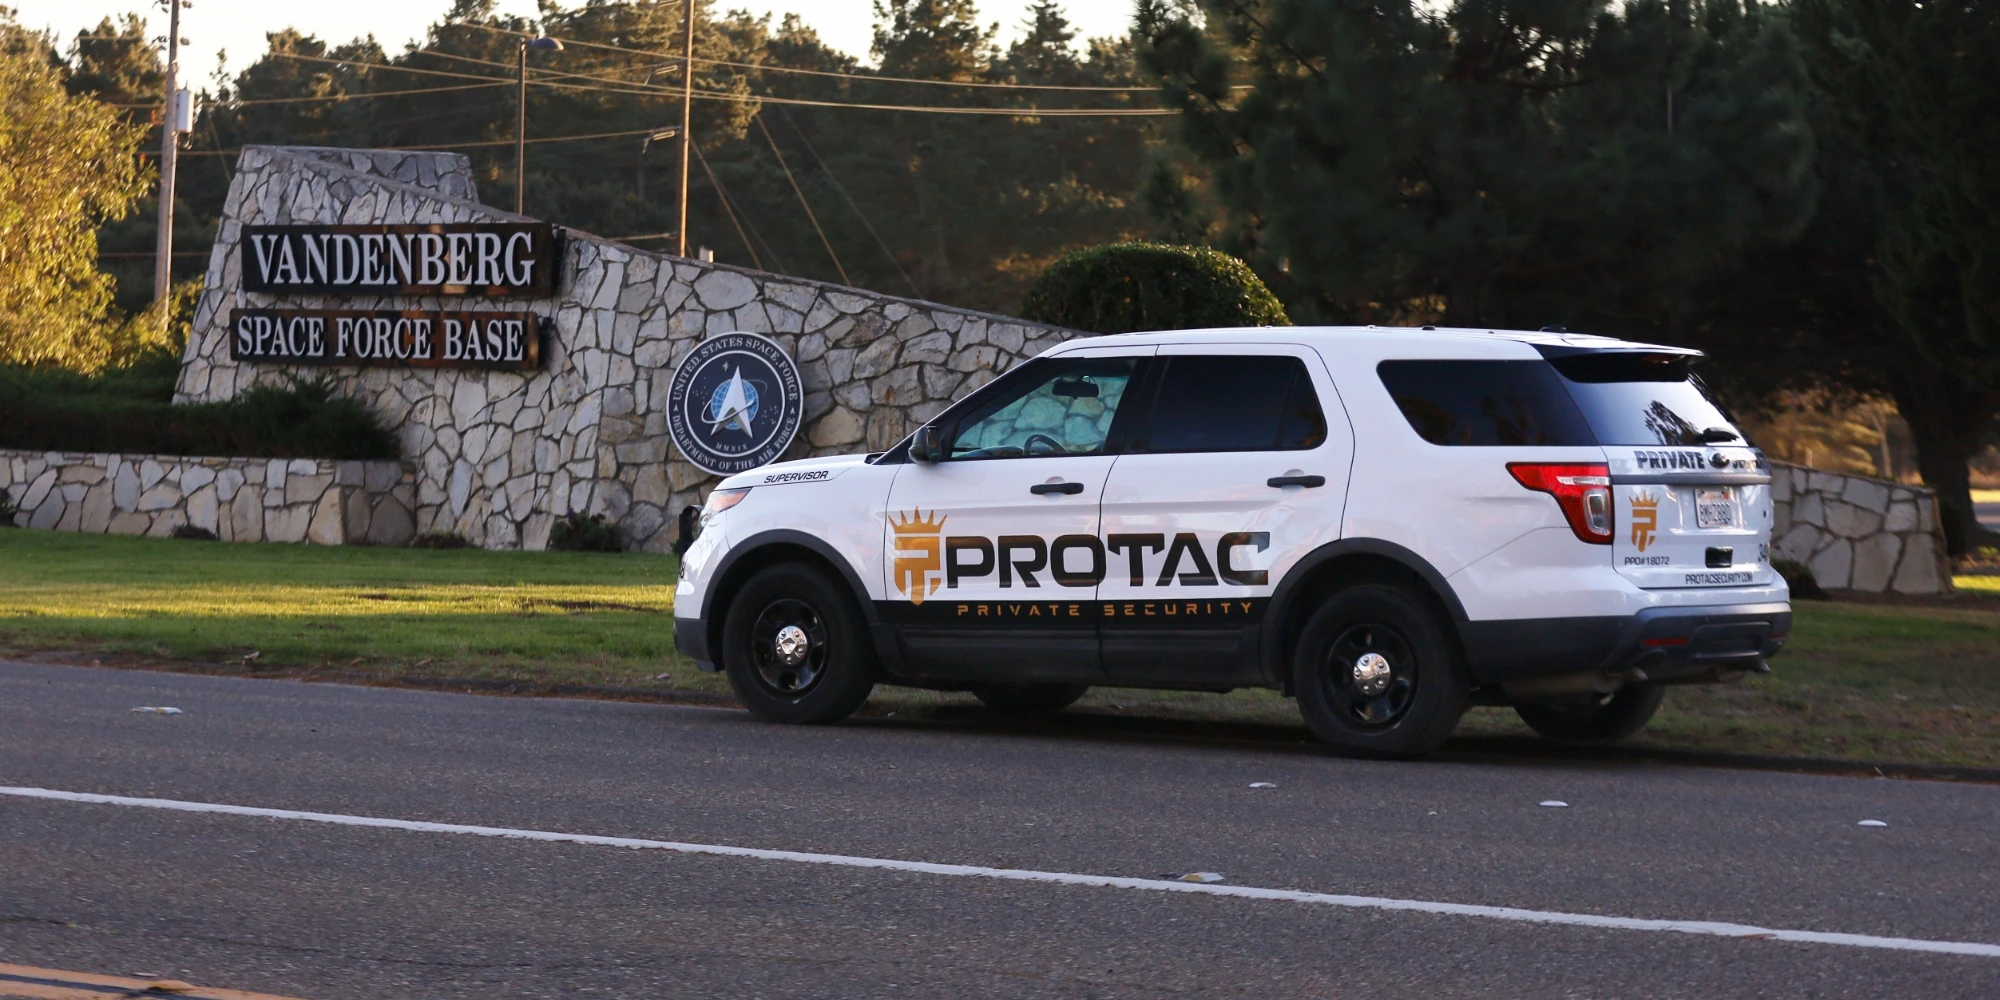 protac security car going to the Vandenberg space force base